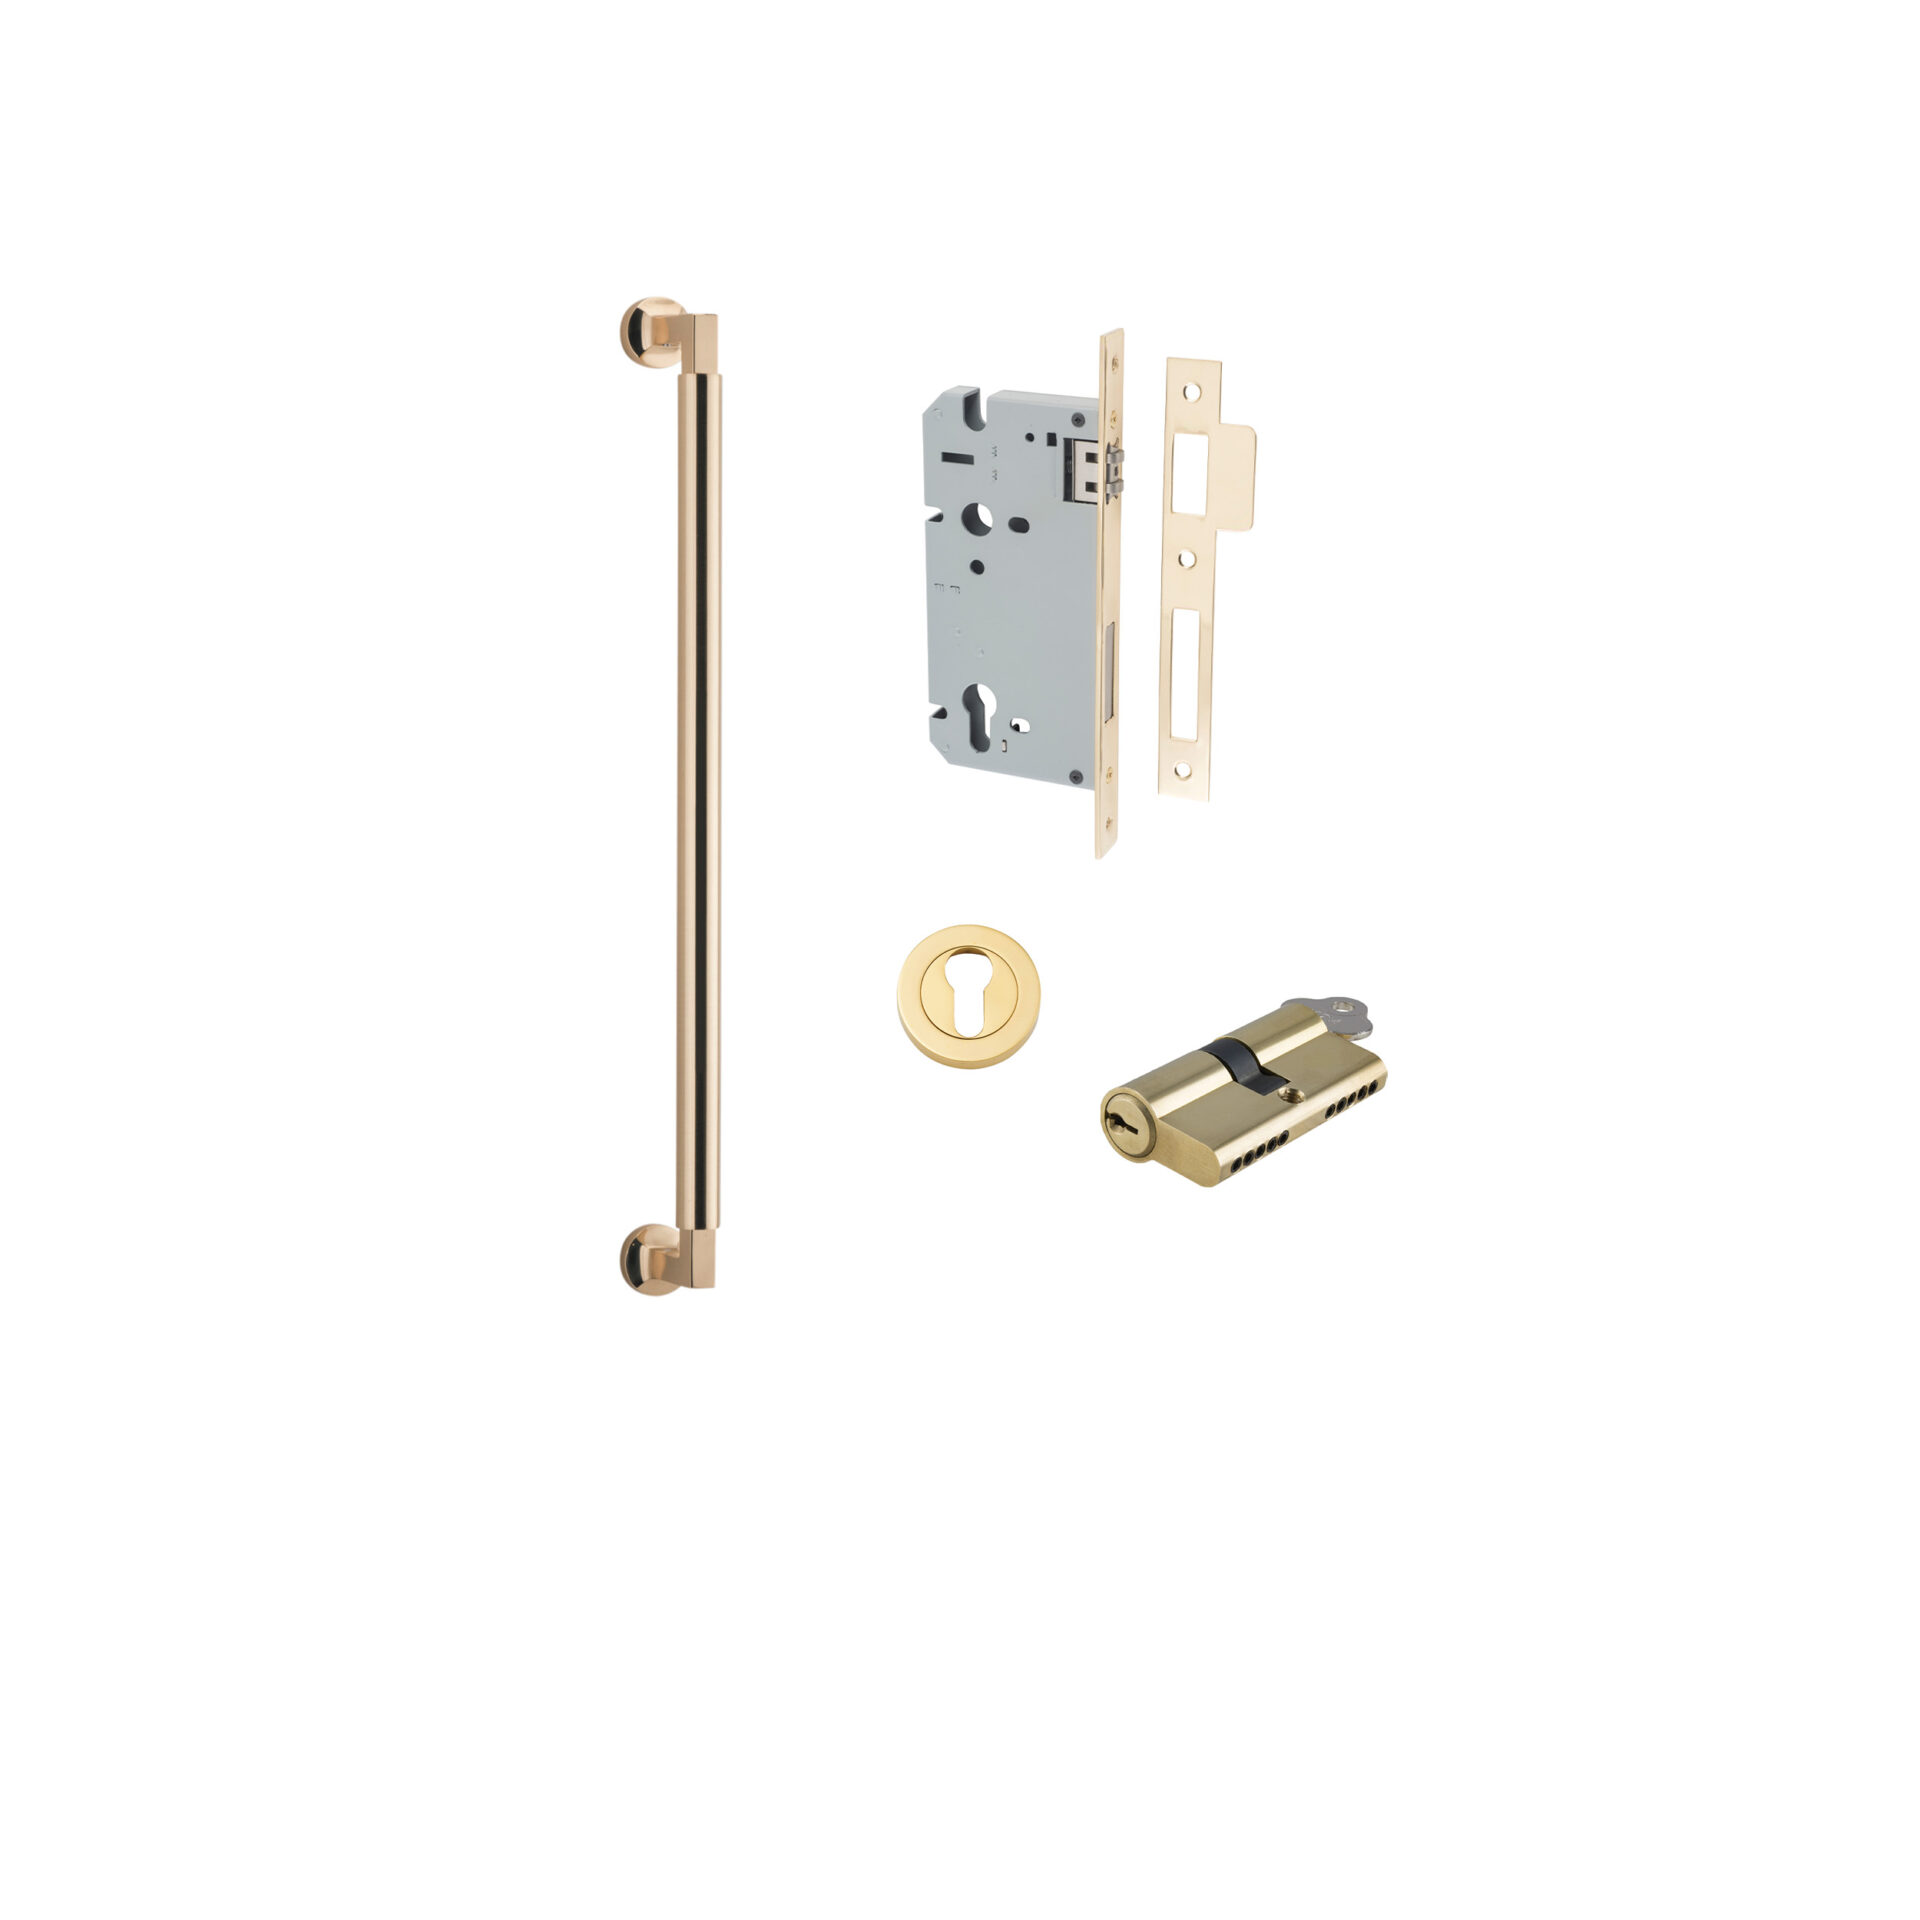 9440KENTR60KK - Berlin Pull Handle - 450mm Entrance Kit with Separate High Security Lock - Polished Brass - Entrance